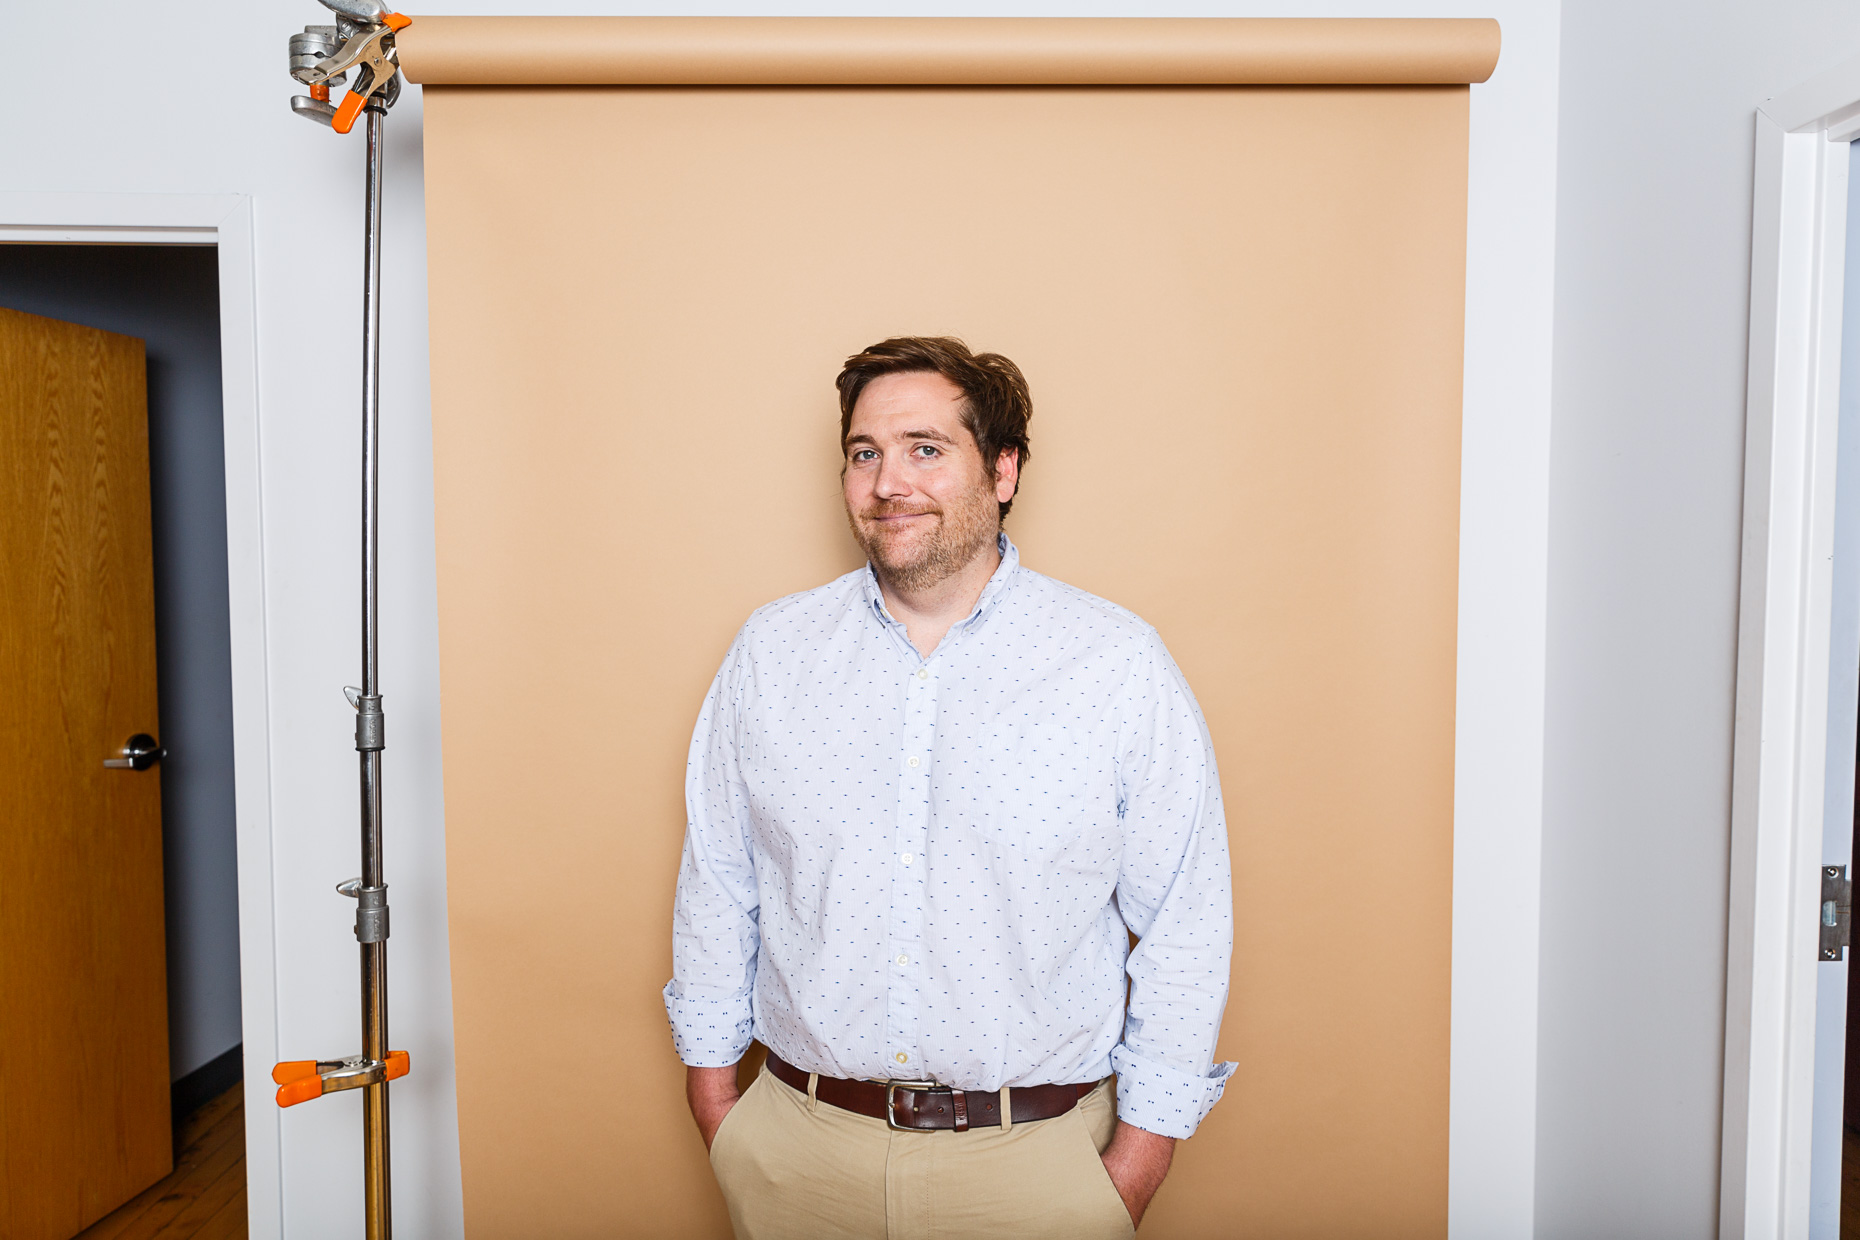 Justin Messmer, CFO of Mid-American Elevator, photographed at their offices in Chicago, IL